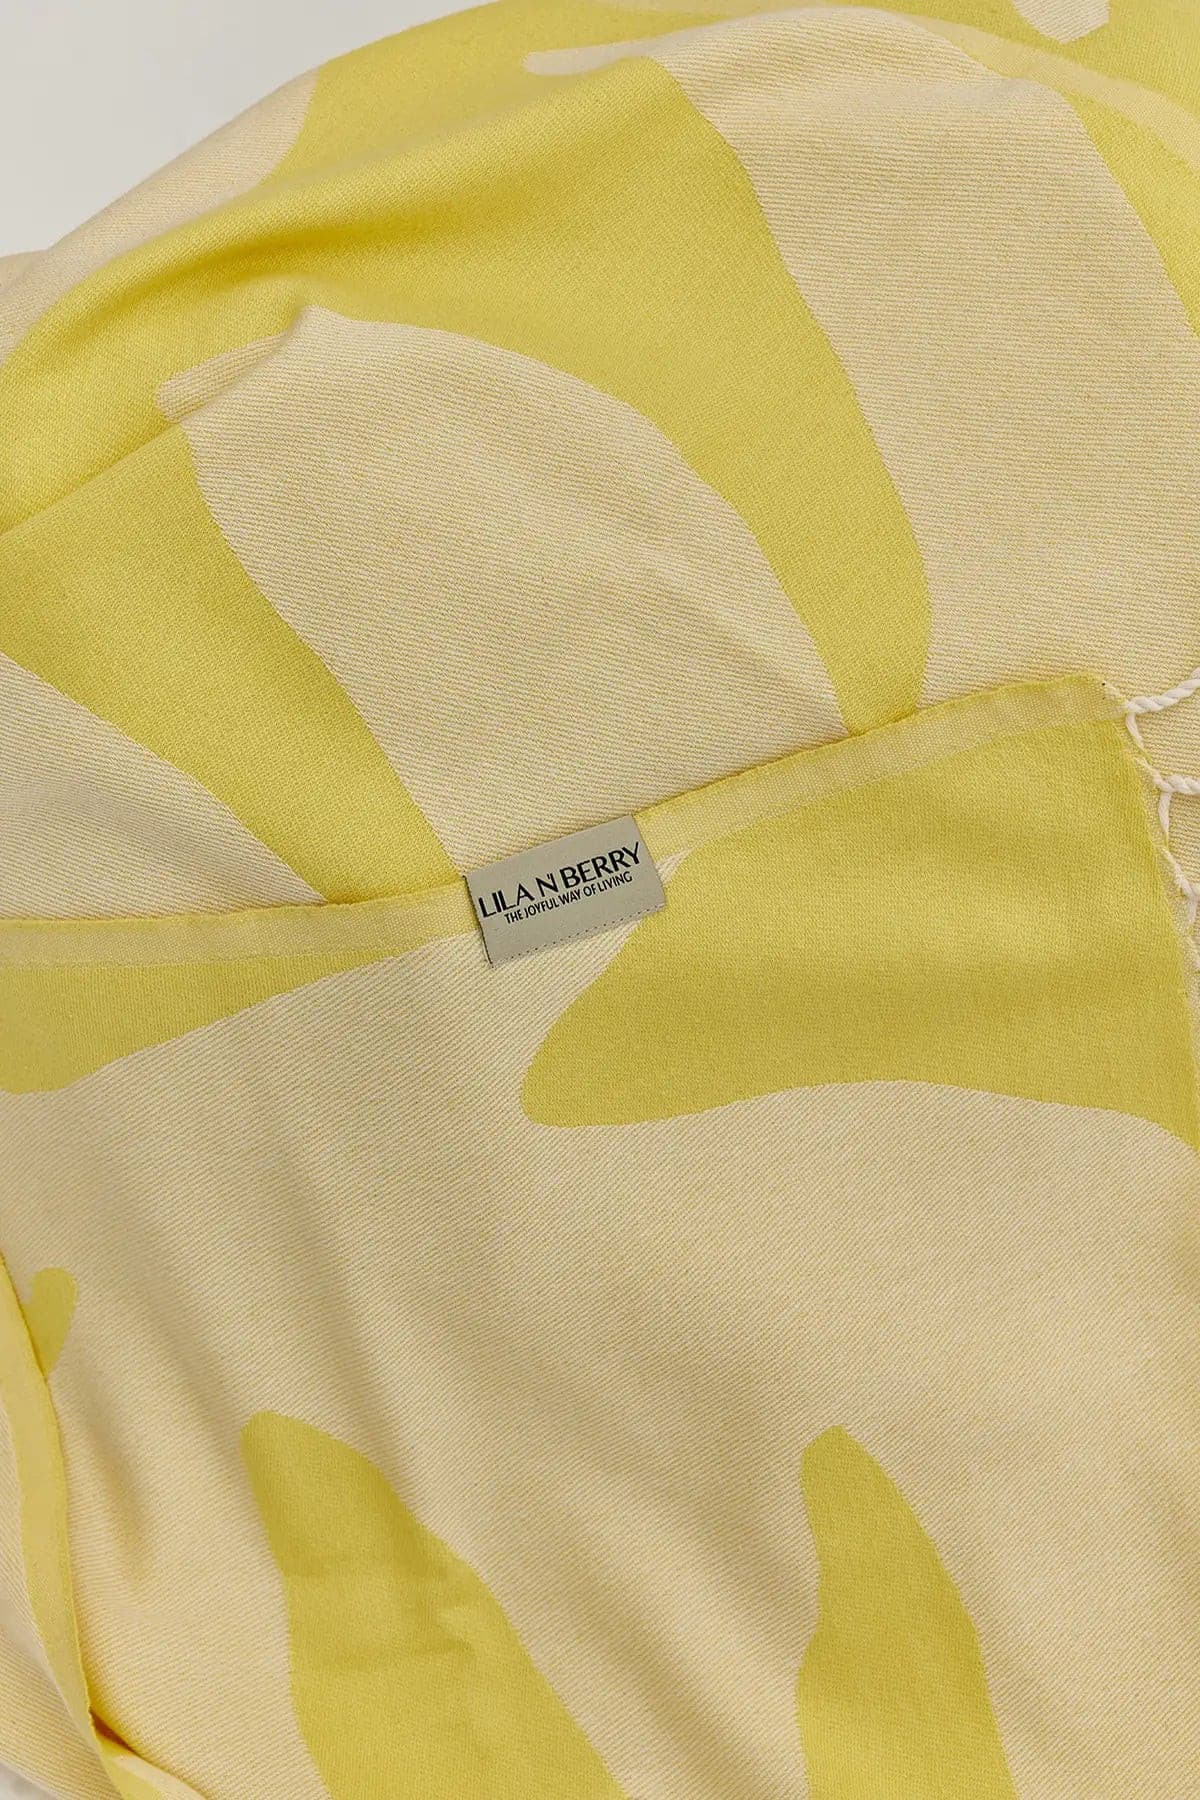 Beach/Bath,living place, Mellow Yellow,Turkish towel,branded,summer,line patterned,double-faces,purified sand,light,compact, easy pack,fun, recycled,double color,diamond,eastern flare,breeze,tropical forest